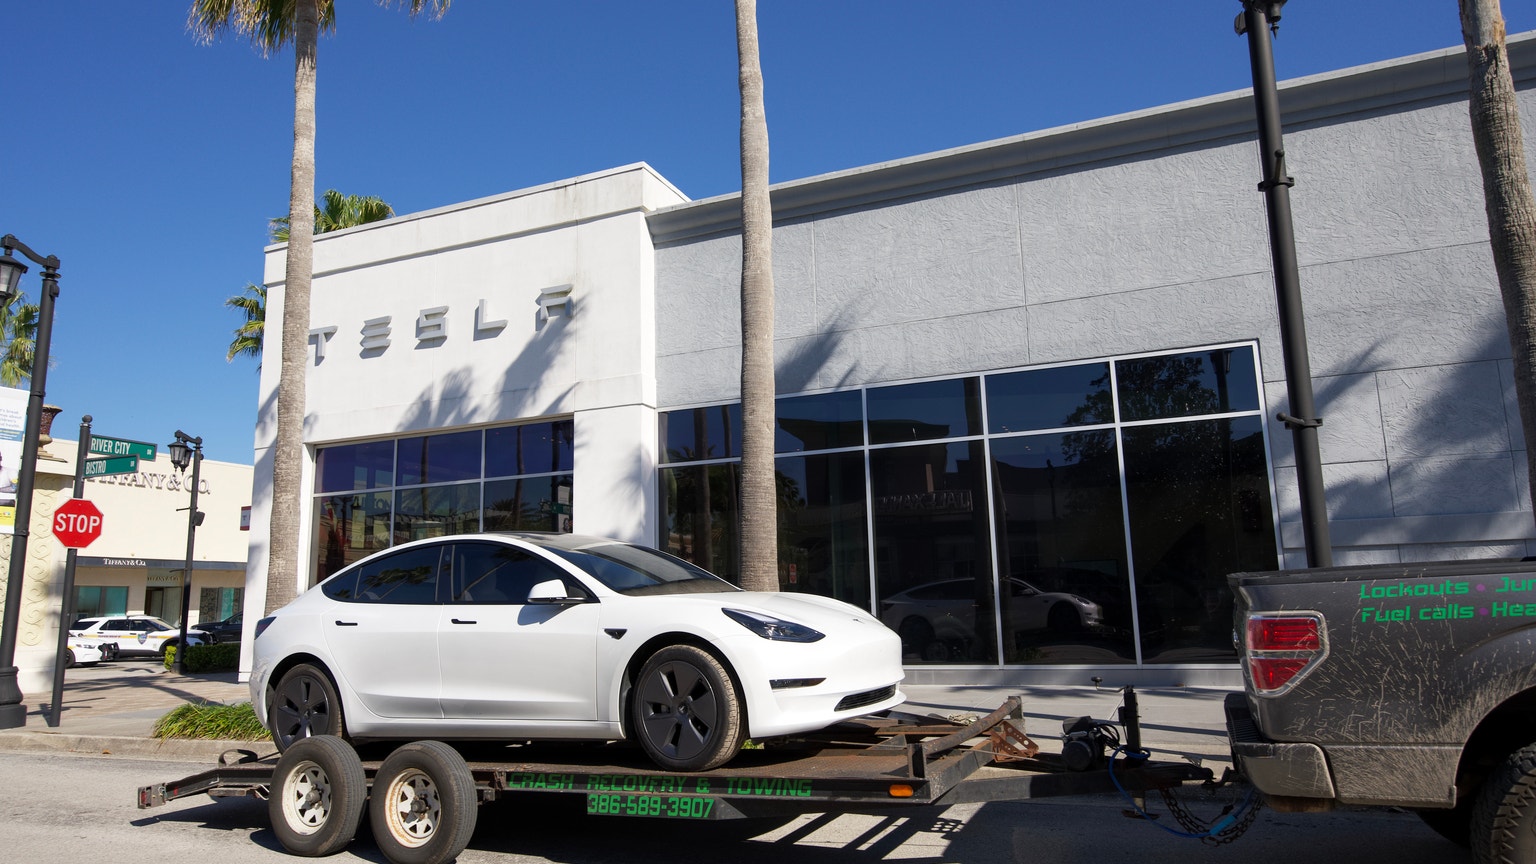 2 Easy Ways To Measure Tesla Return On Investment | Fundamental Data And Statistics For Stocks